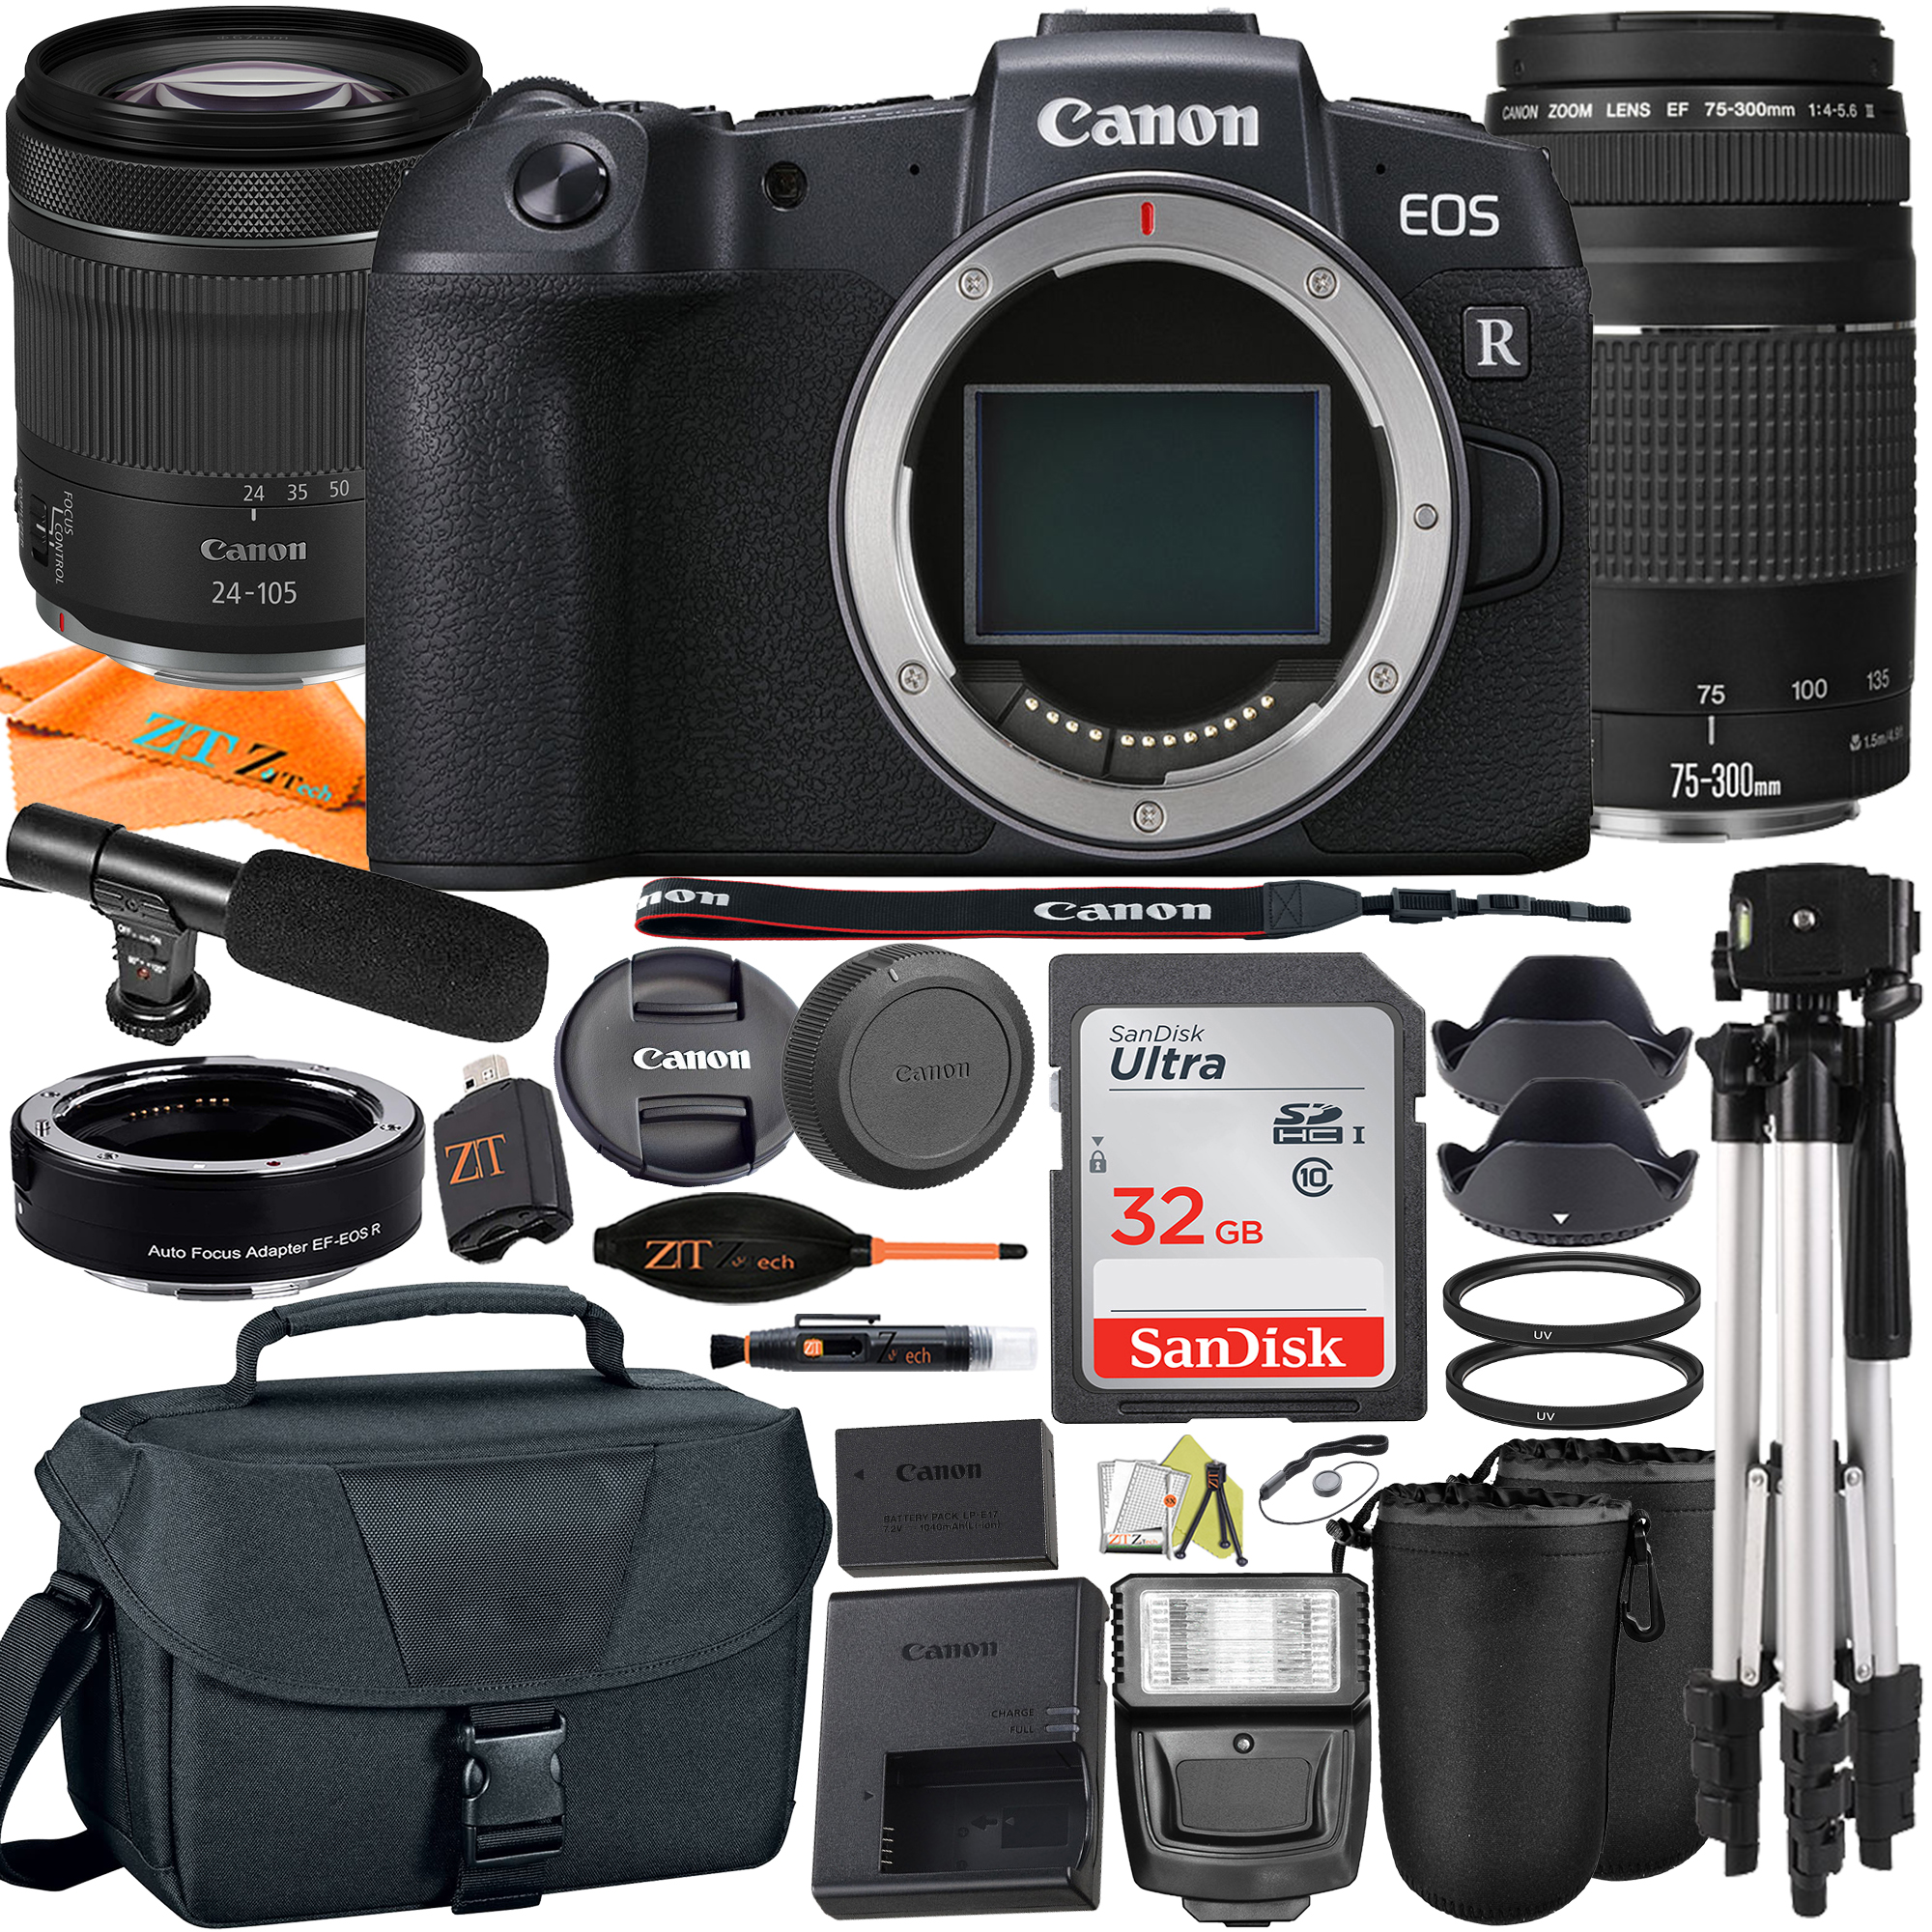 Canon EOS RP Mirrorless Camera with RF24-105mm + 75-300mm Lens + Mount Adapter + SanDisk 32GB + ZeeTech Accessory